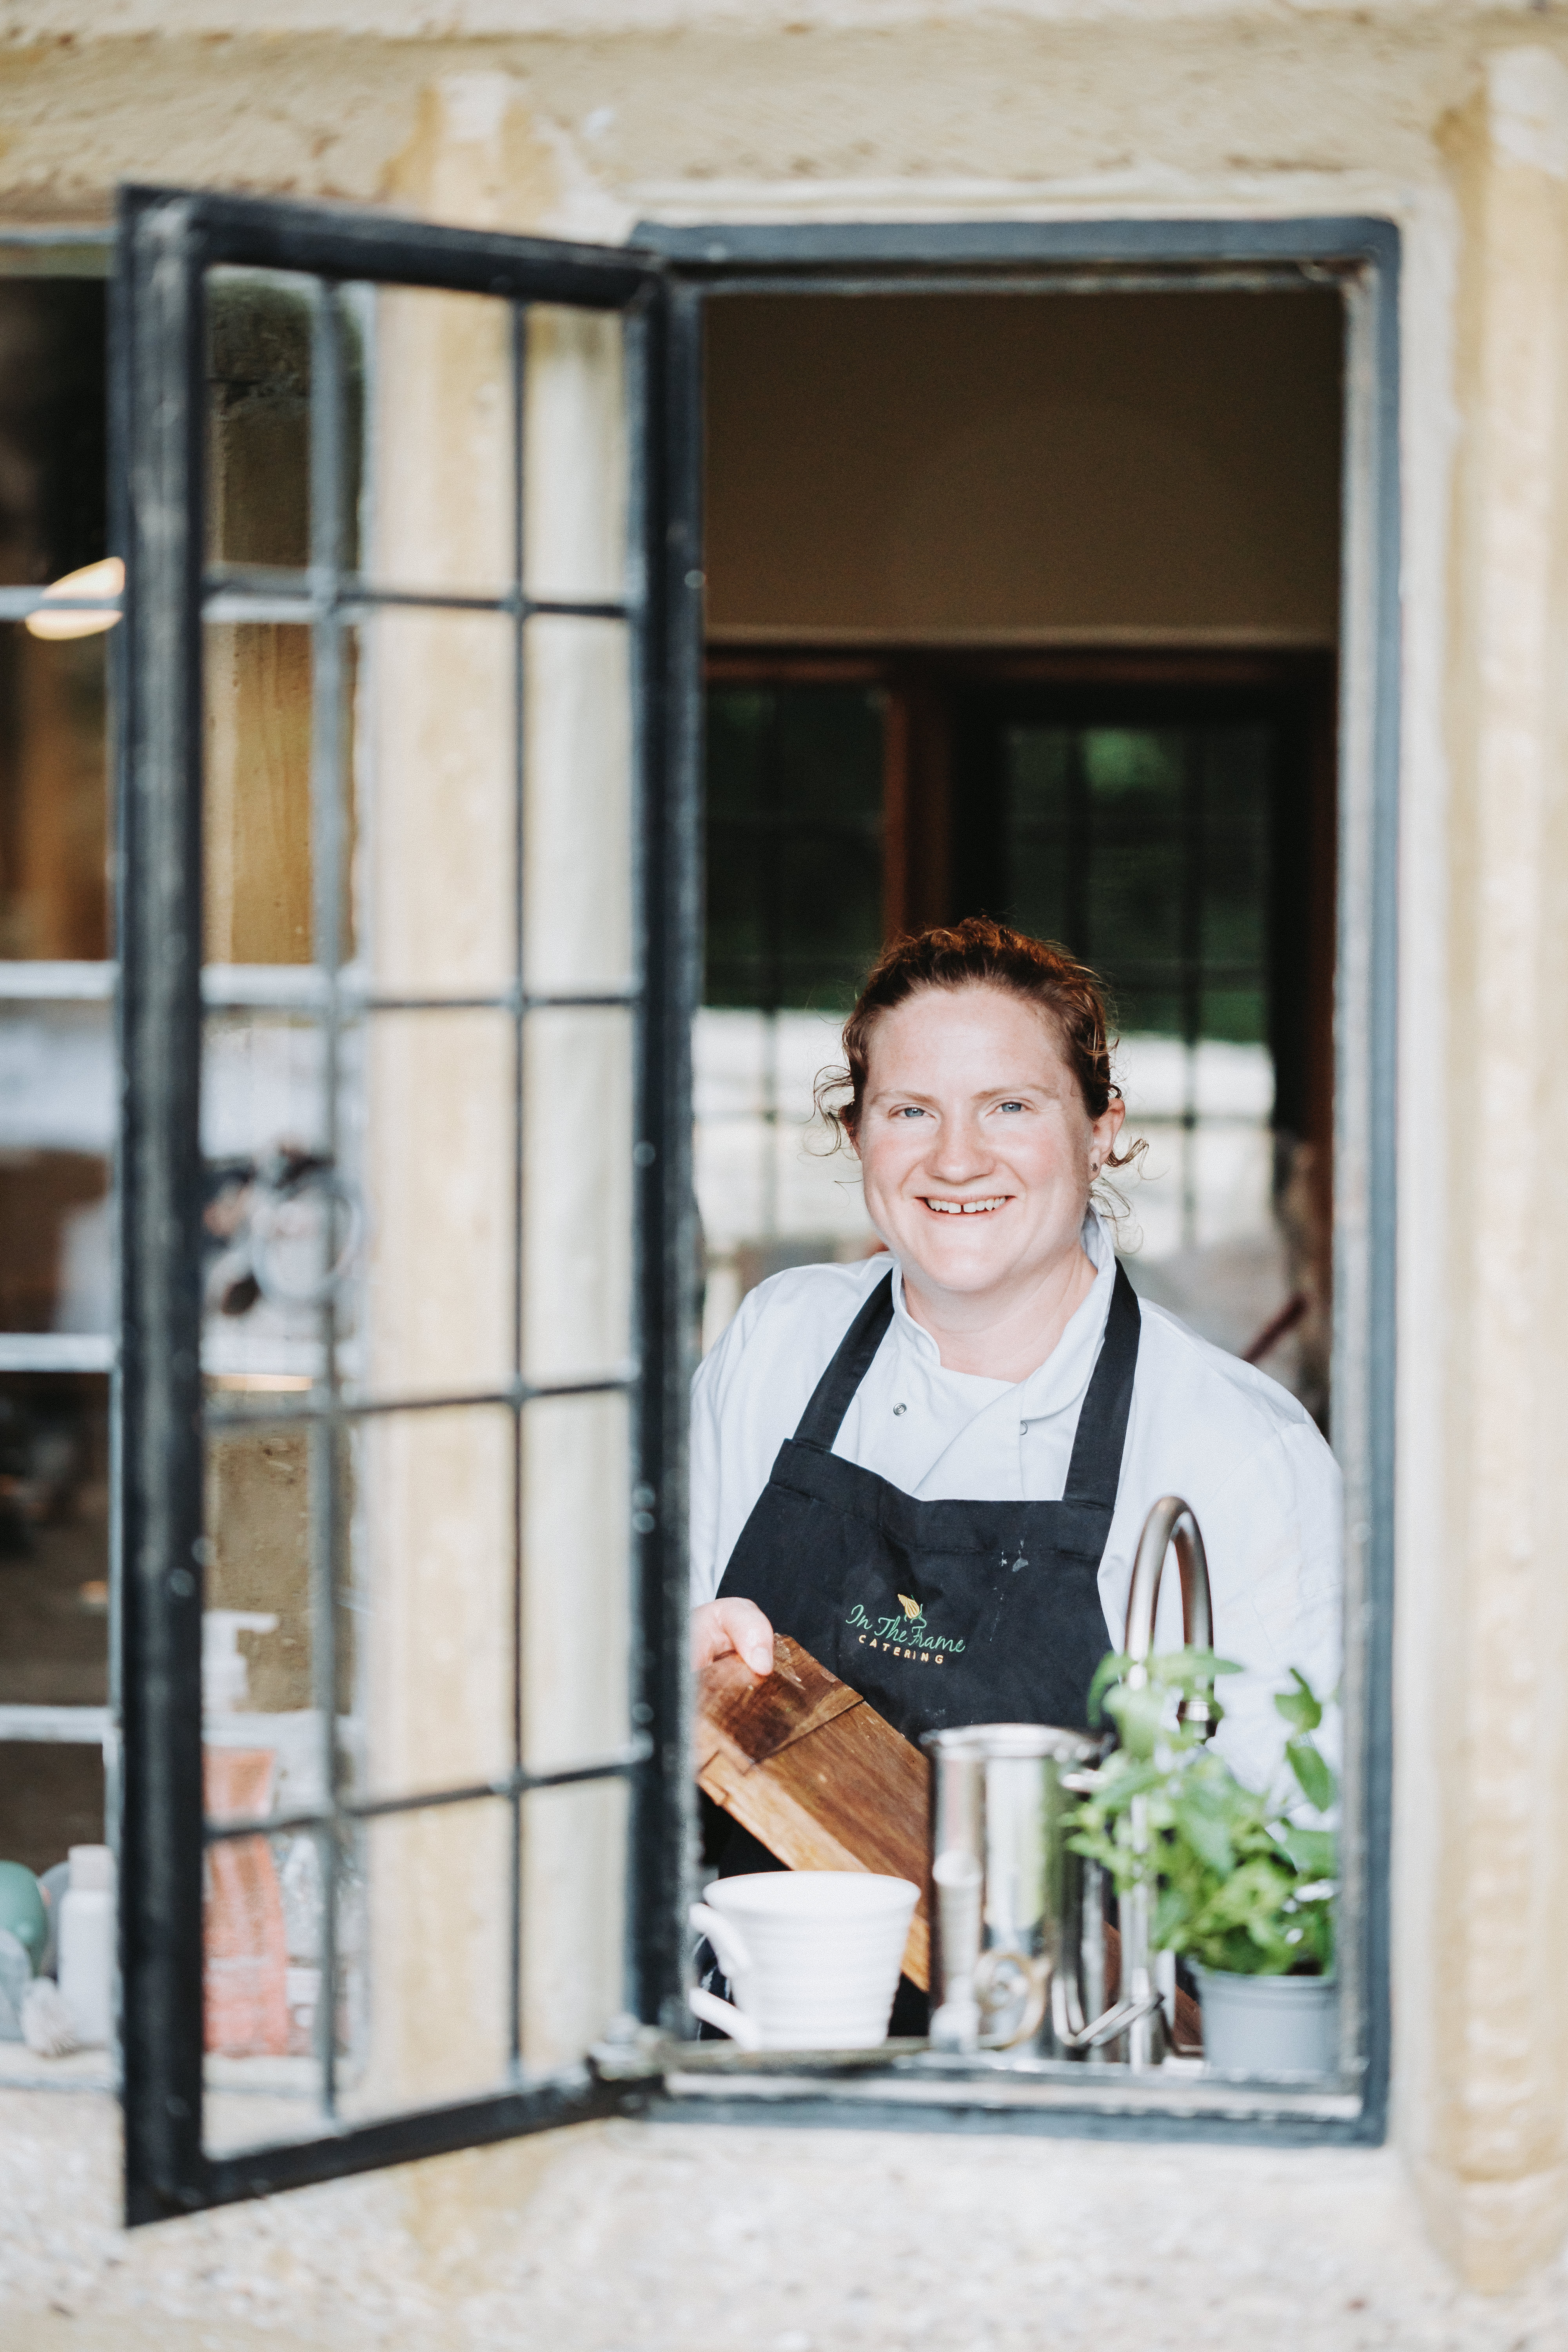 Owner and head chef Hazel Frame